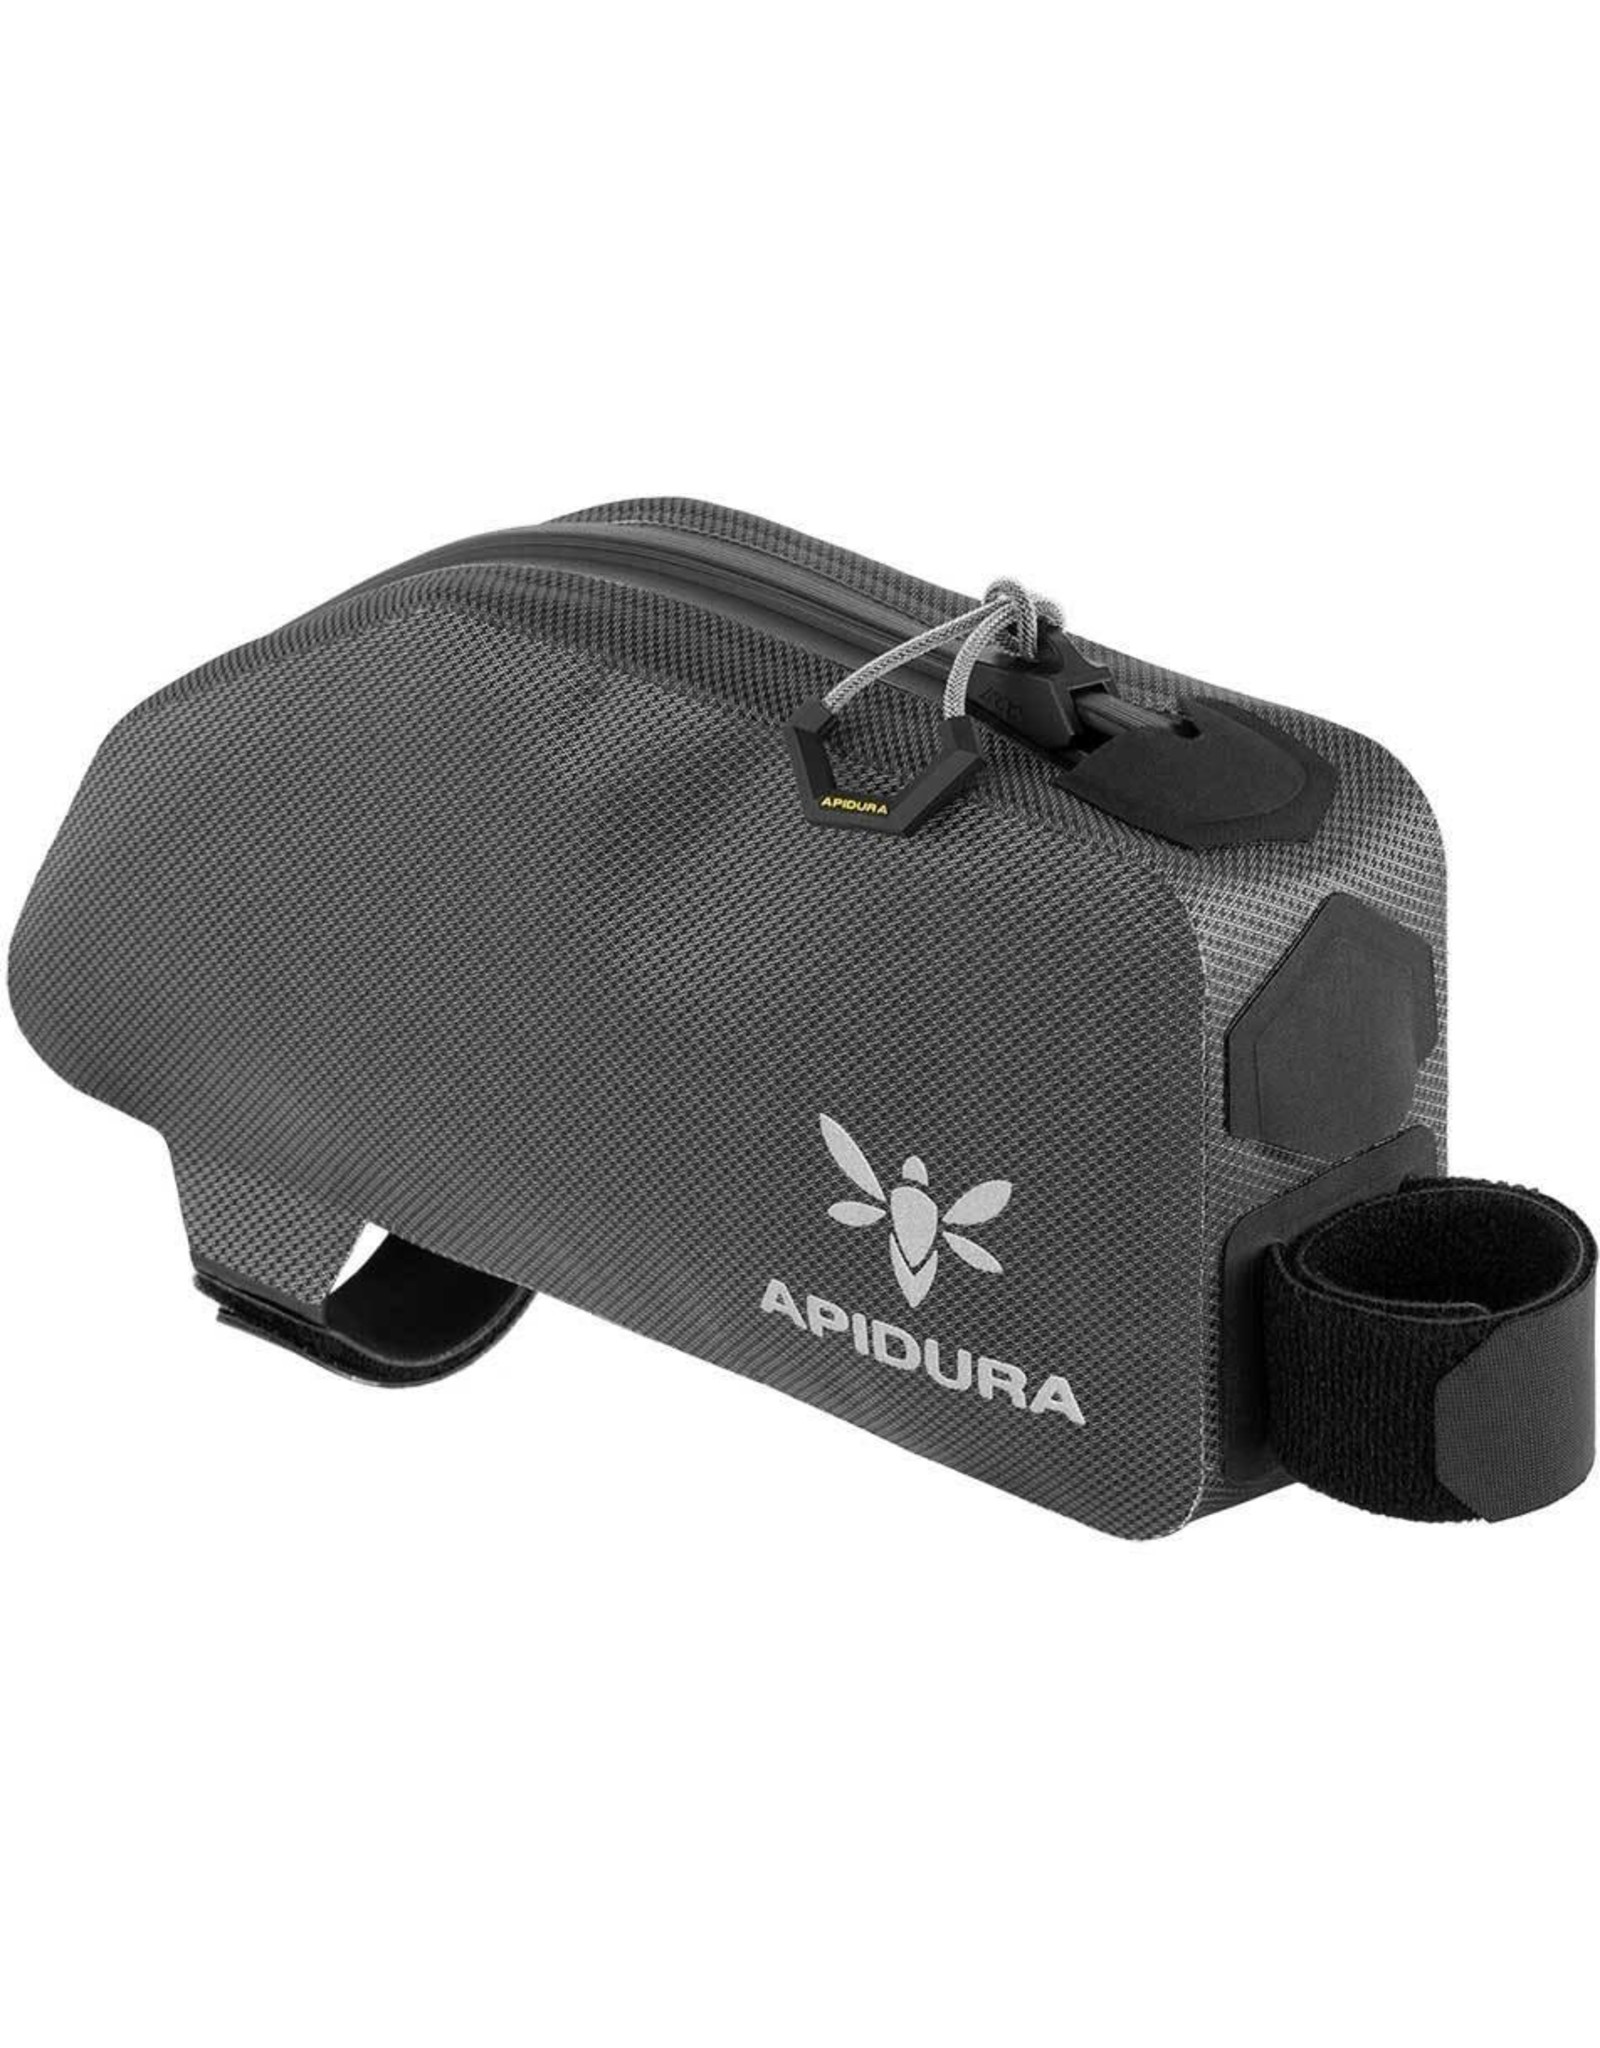 expedition top tube pack apidura